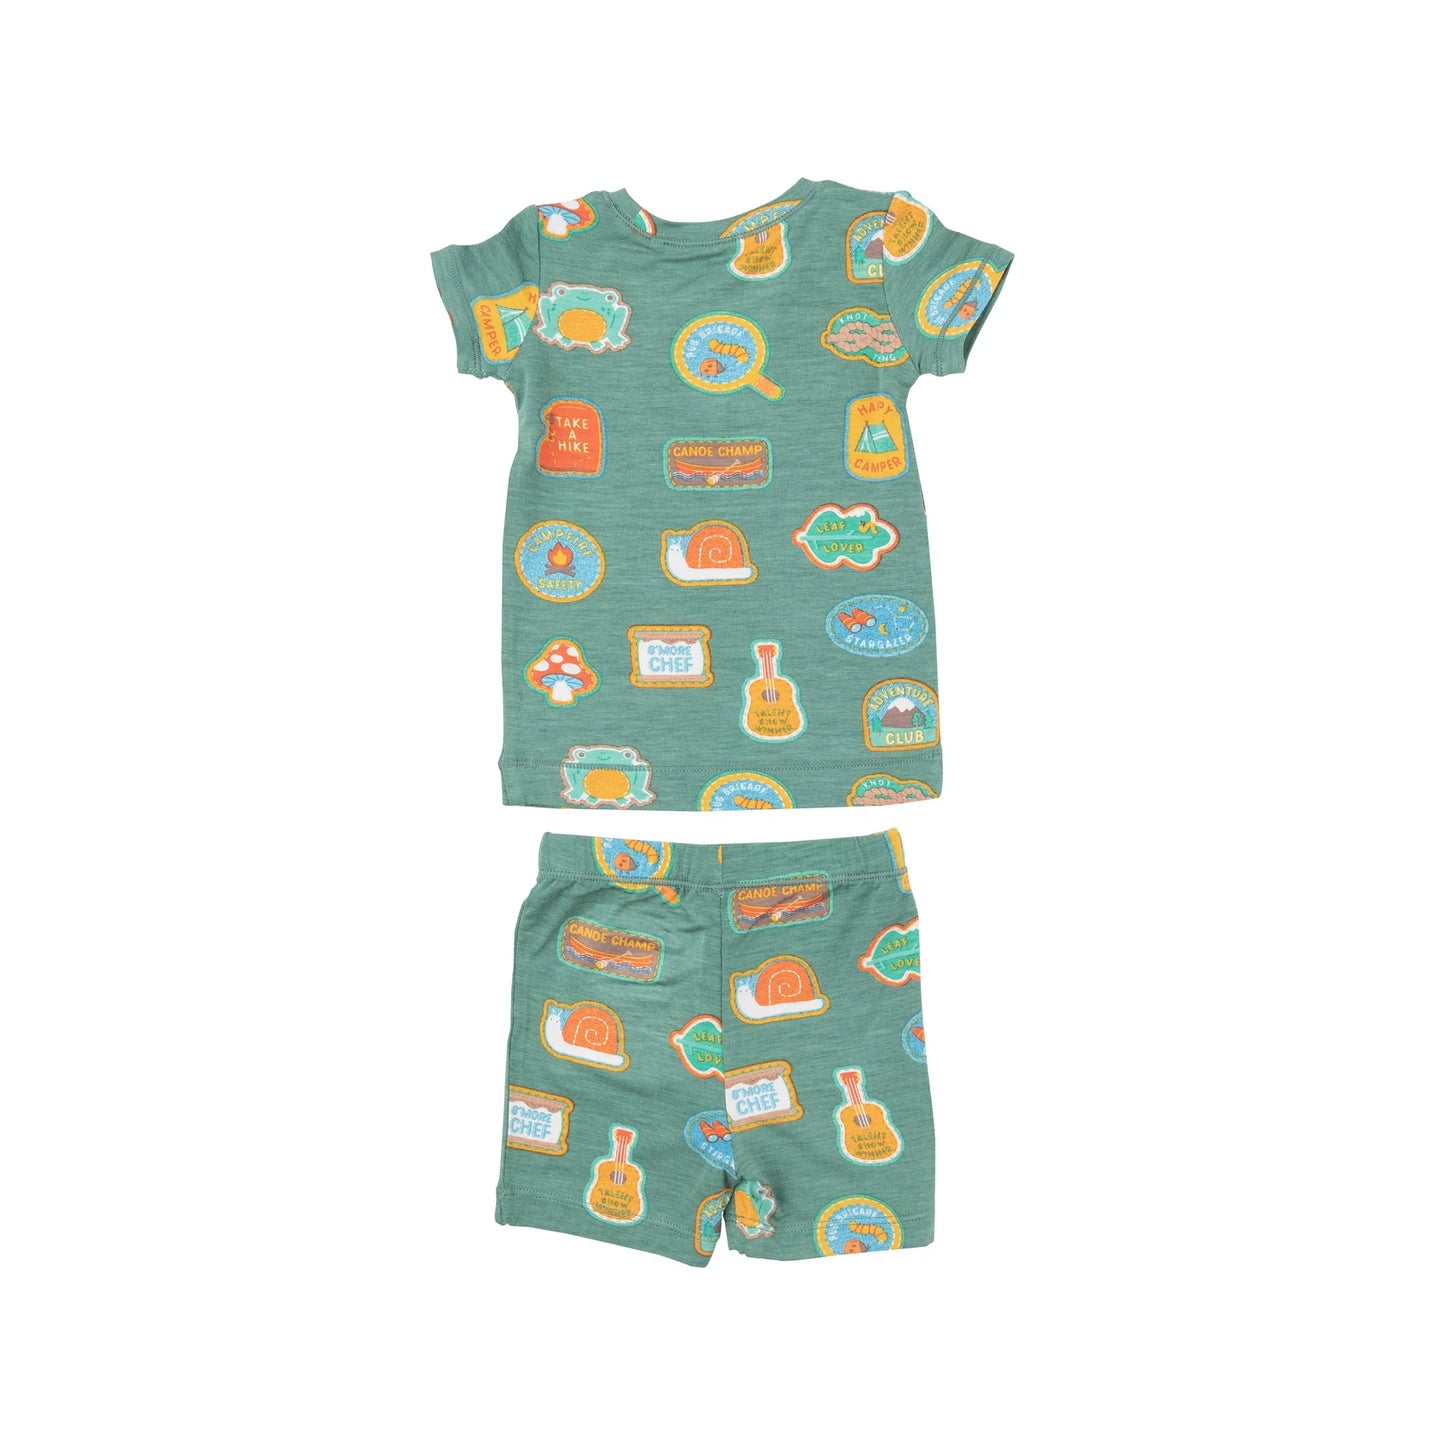 Loungewear Short Set in Camp Patches  - Doodlebug's Children's Boutique